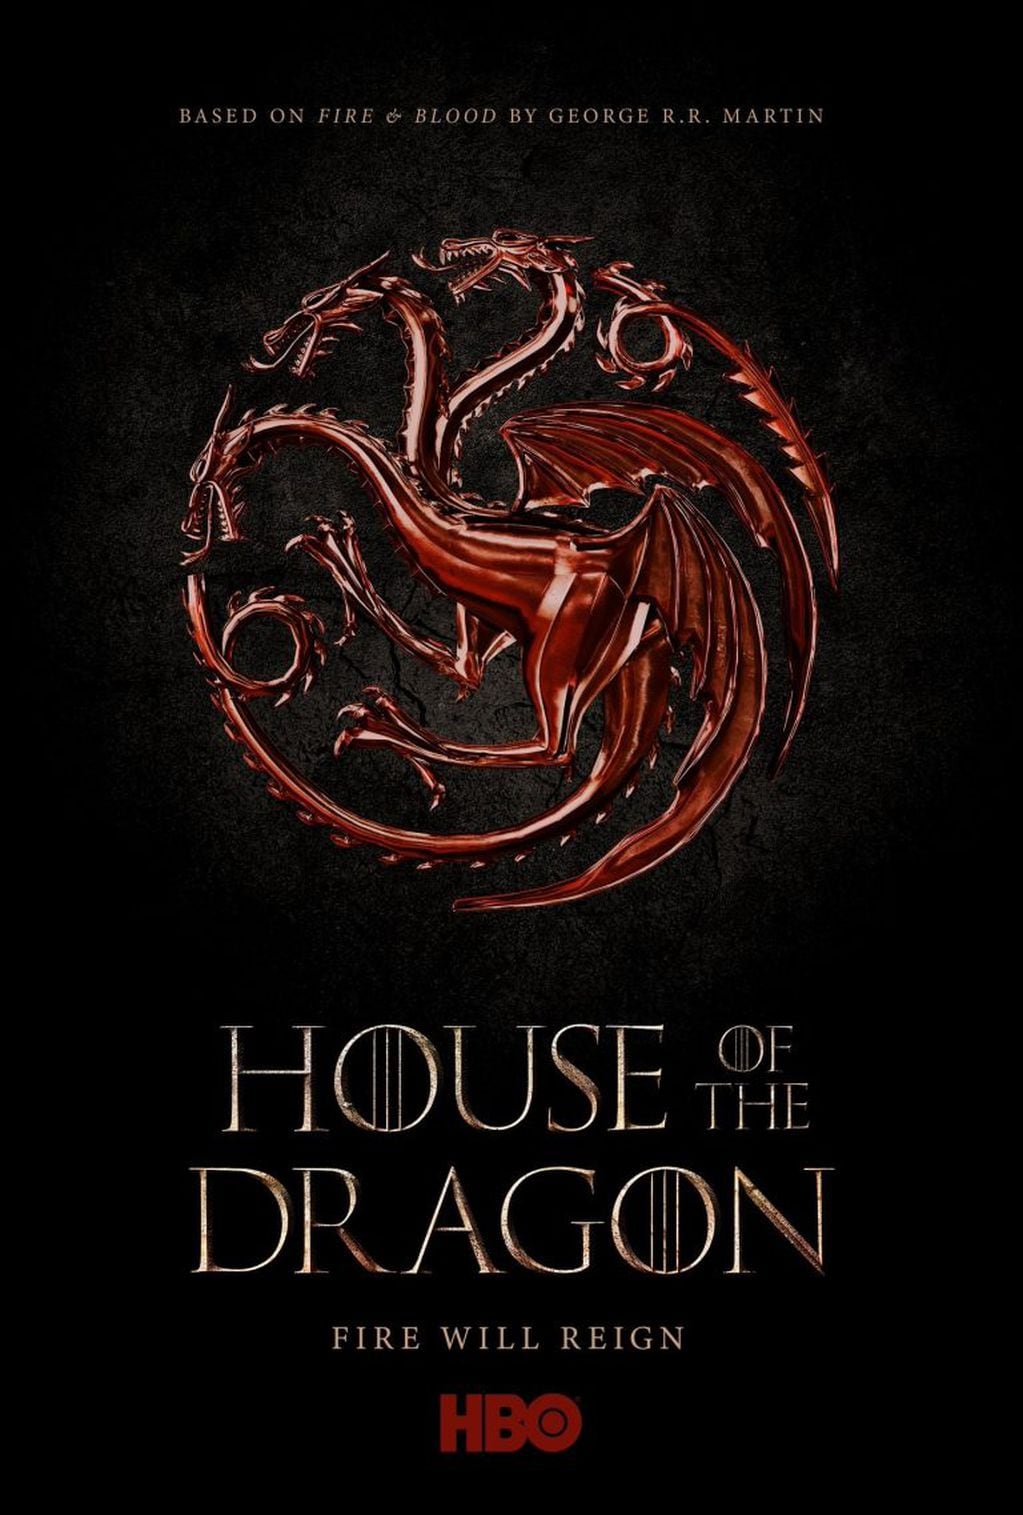 House of the Dragon disponible en HBO.